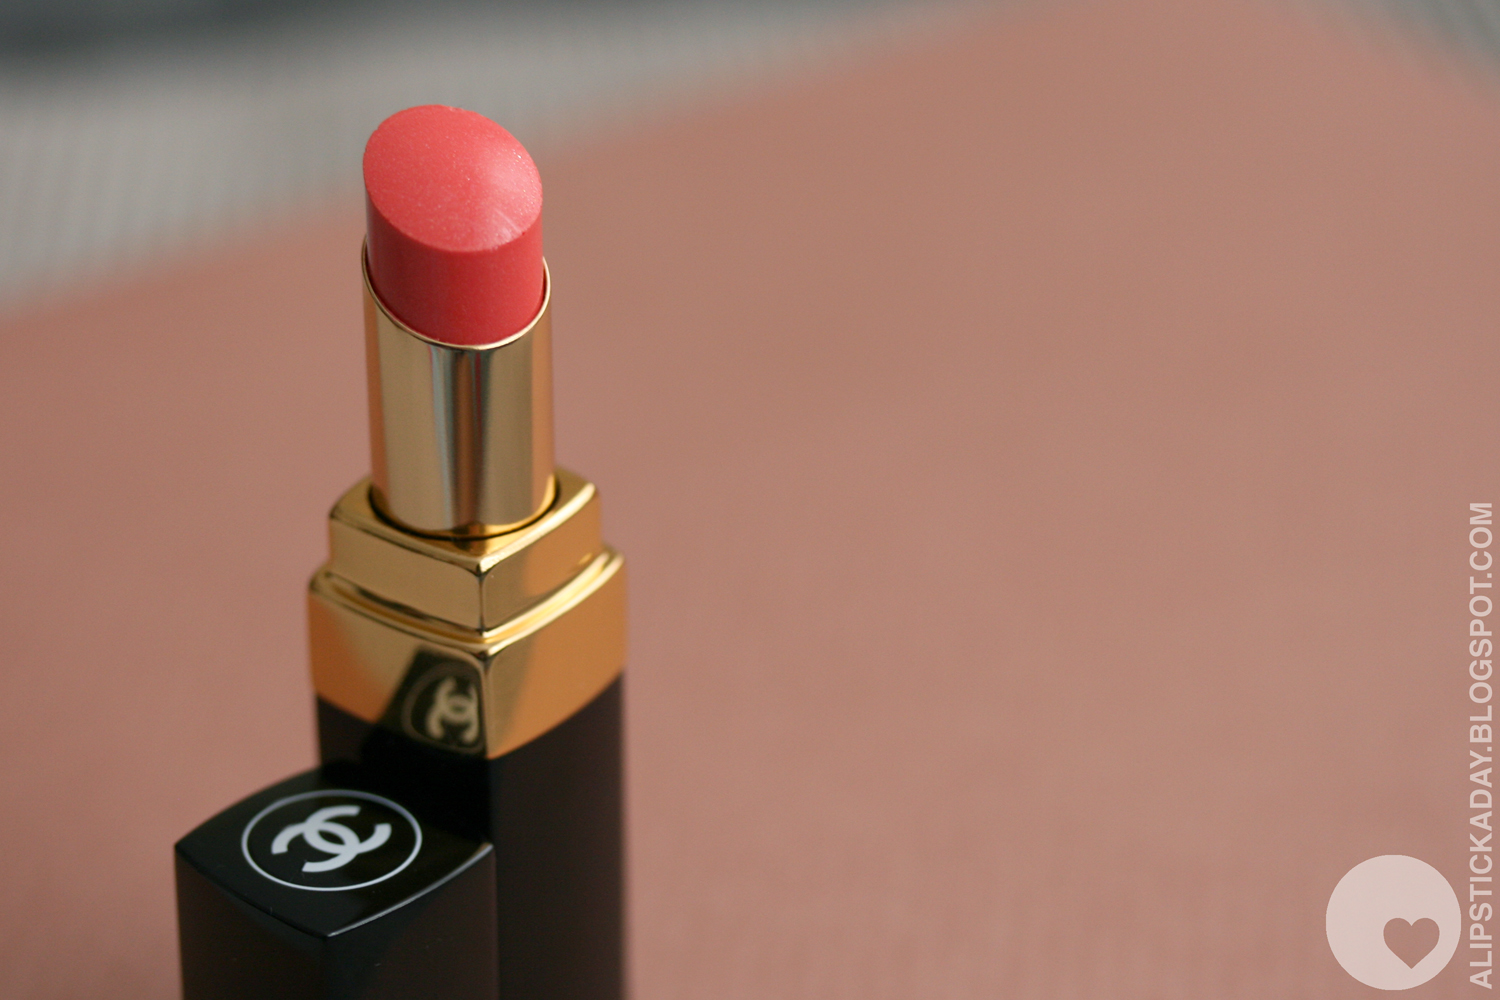 A LIPSTICK A DAY: Lipstick of the day #17 - Chanel Rouge Coco